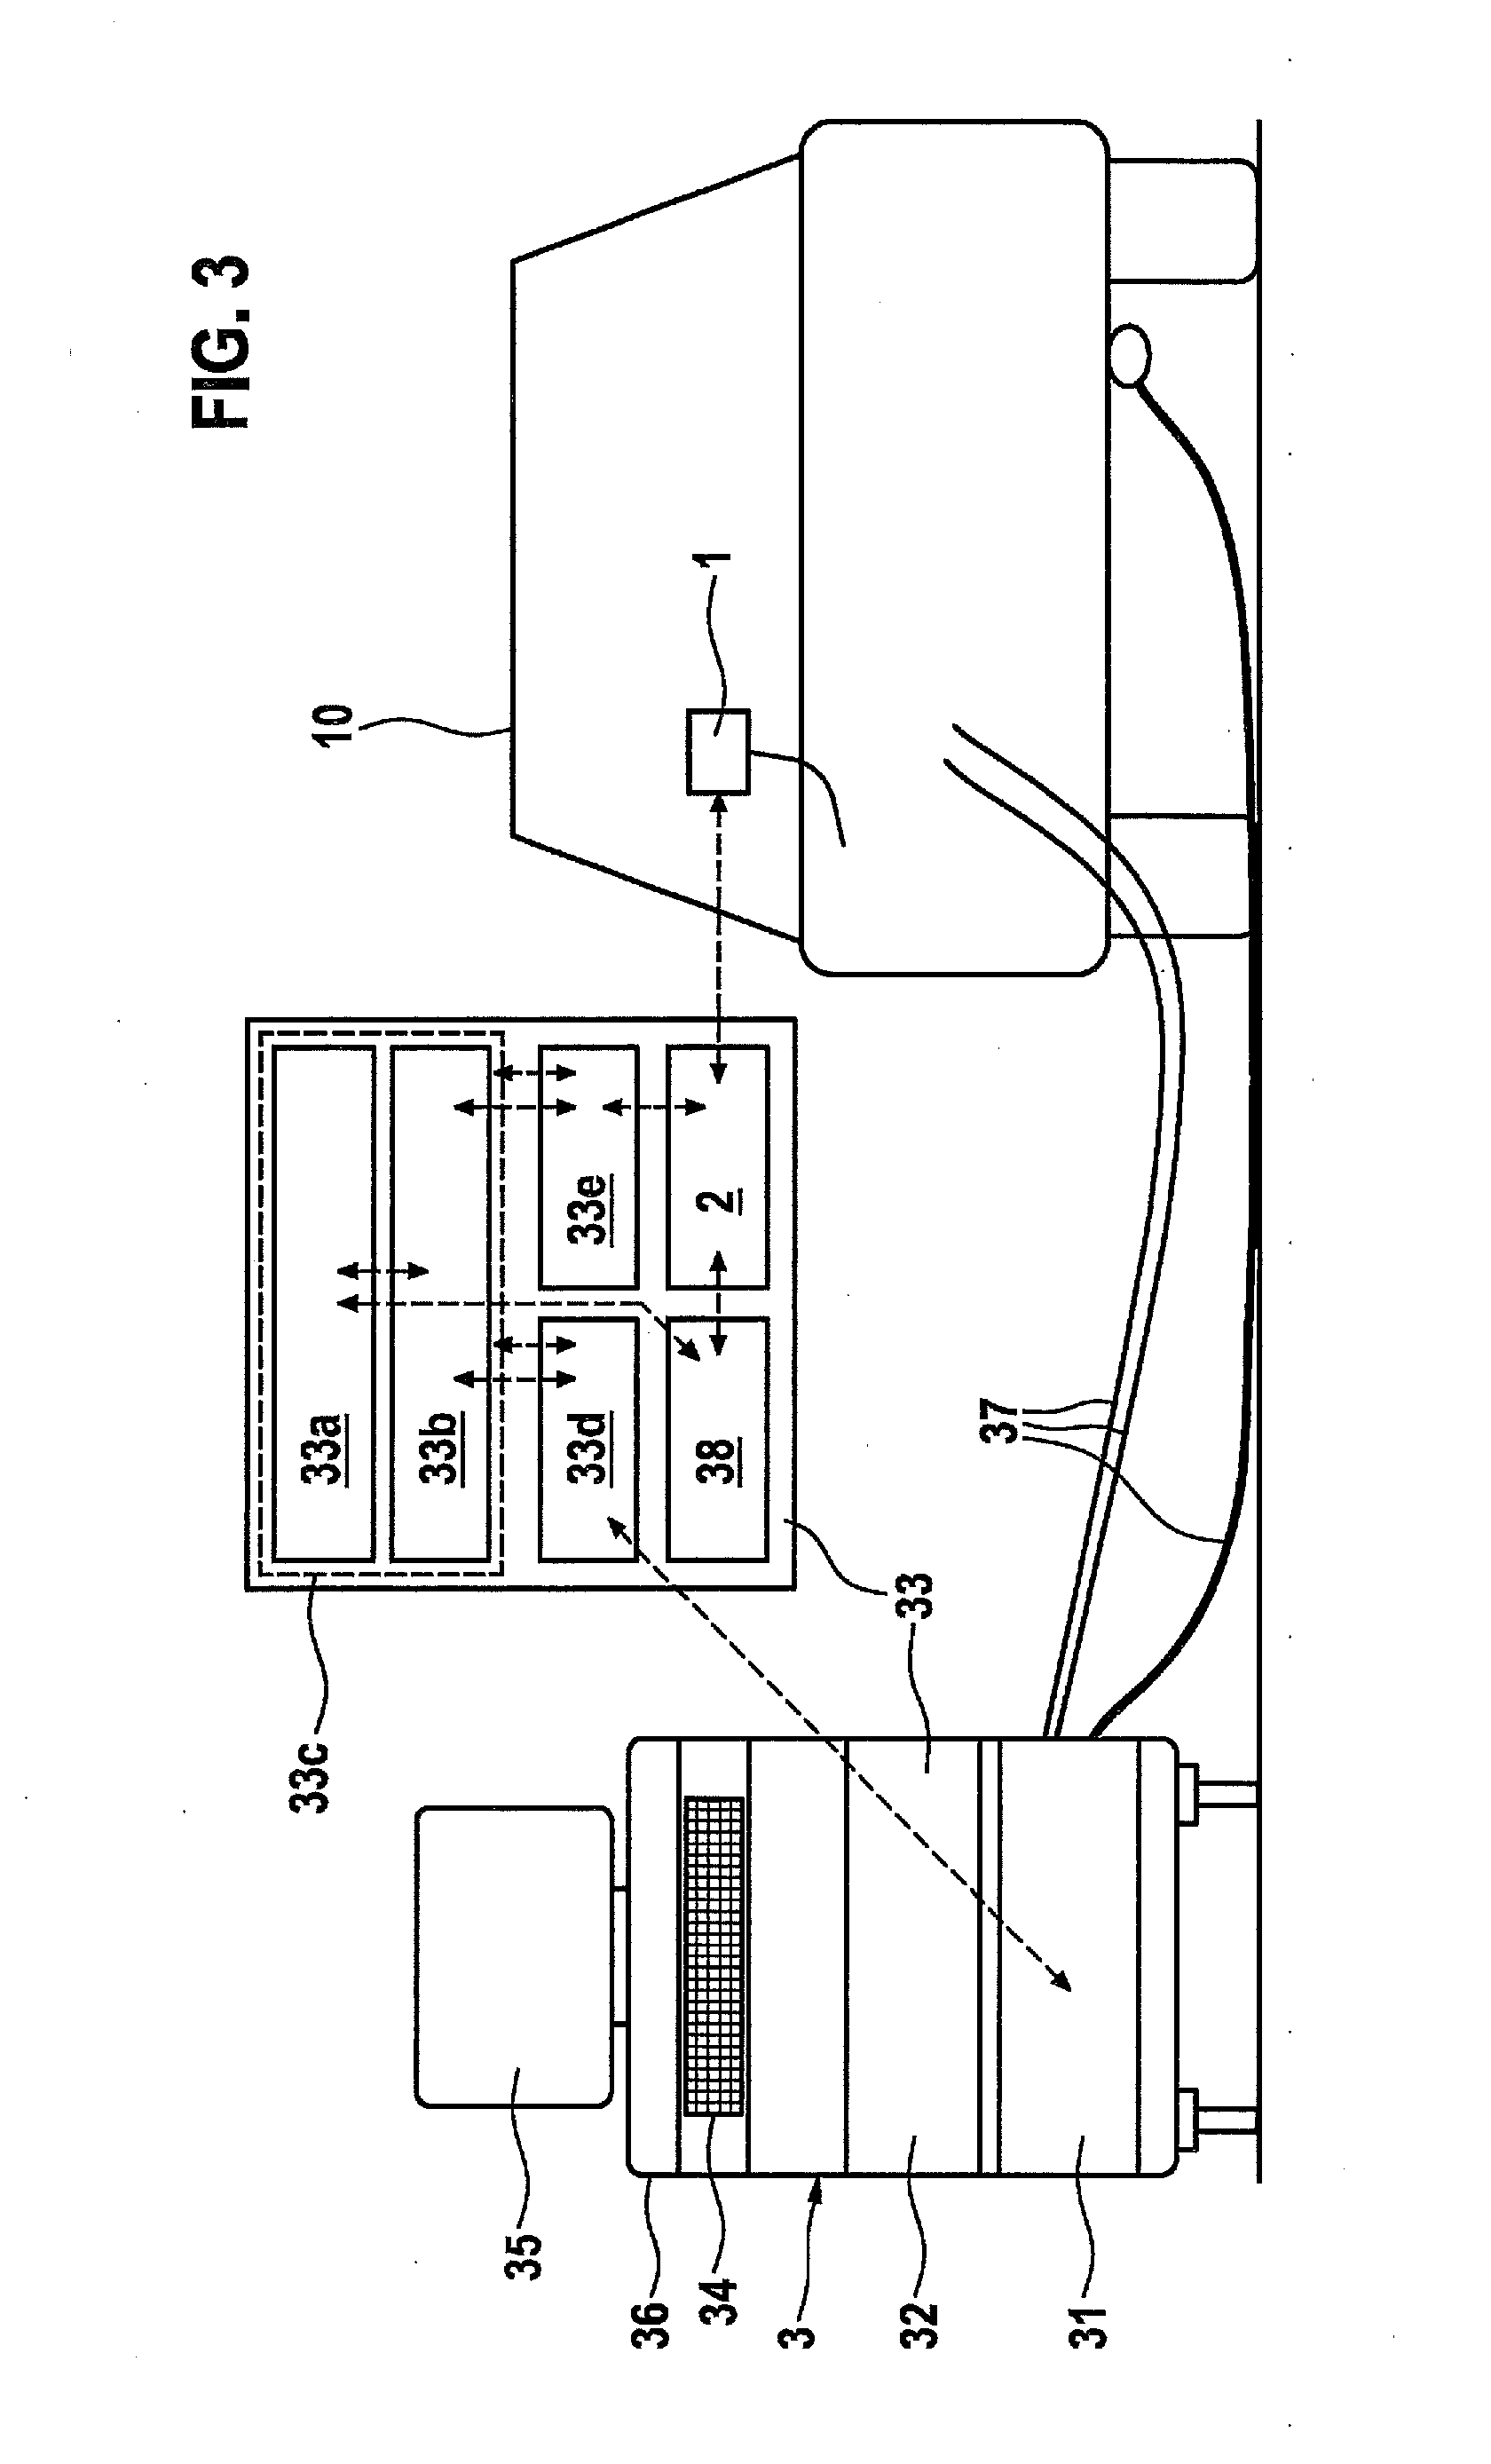 Mobile communication interface, system having a mobile communication interface, and method for identifying, diagnosing, maintaining, and repairing a vehicle